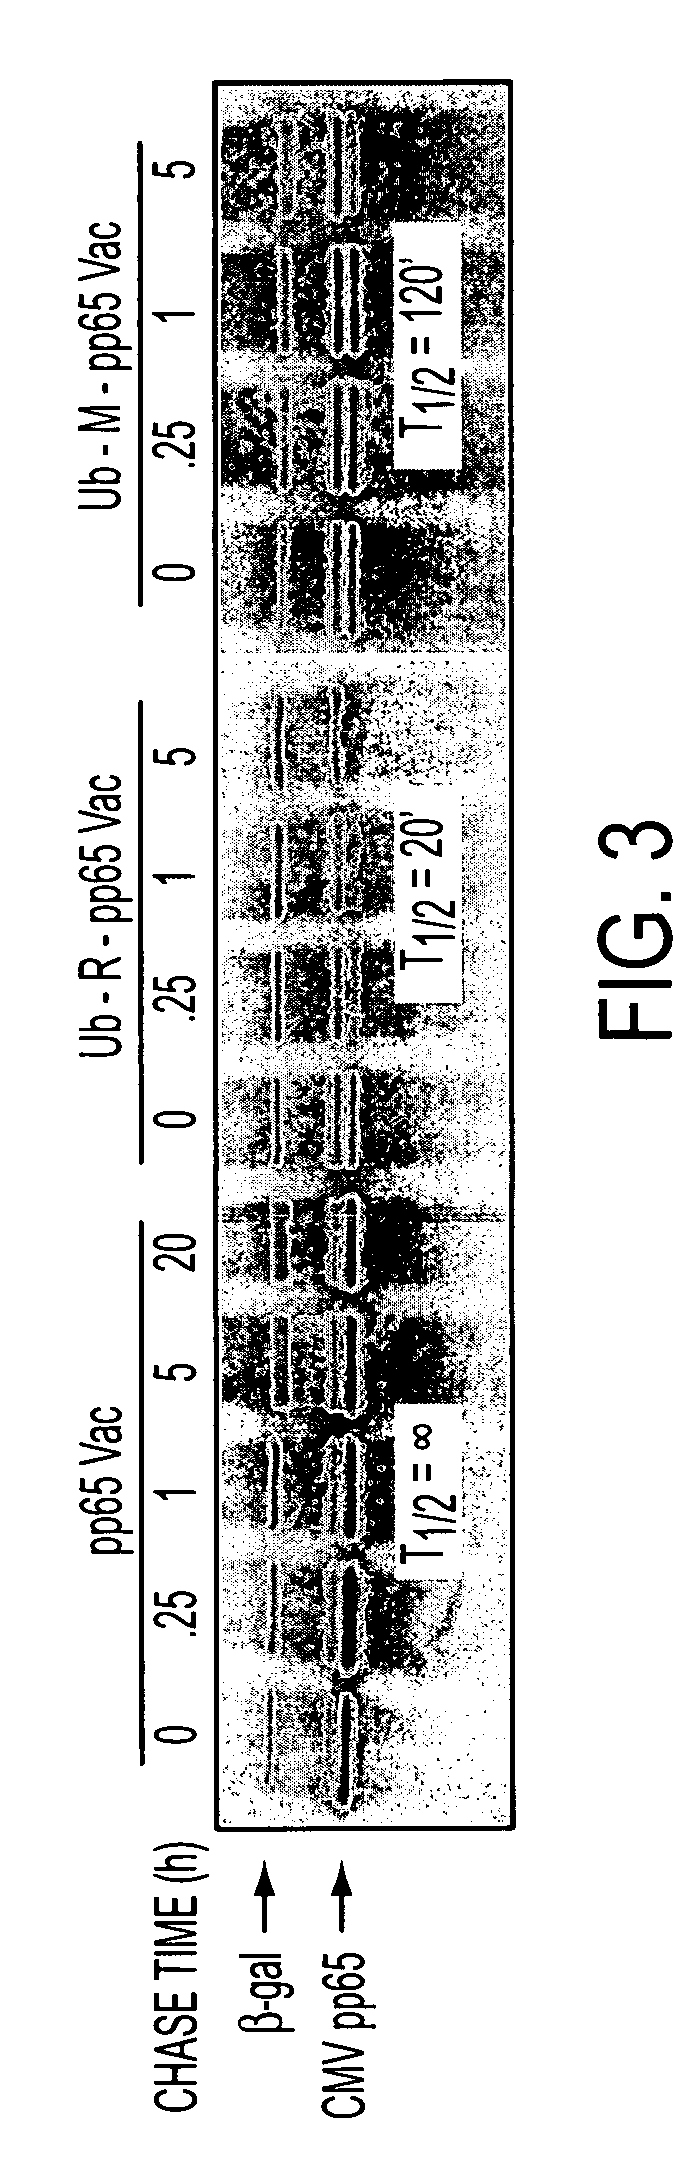 Human cytomegalovirus antigens expressed in MVA and methods of use